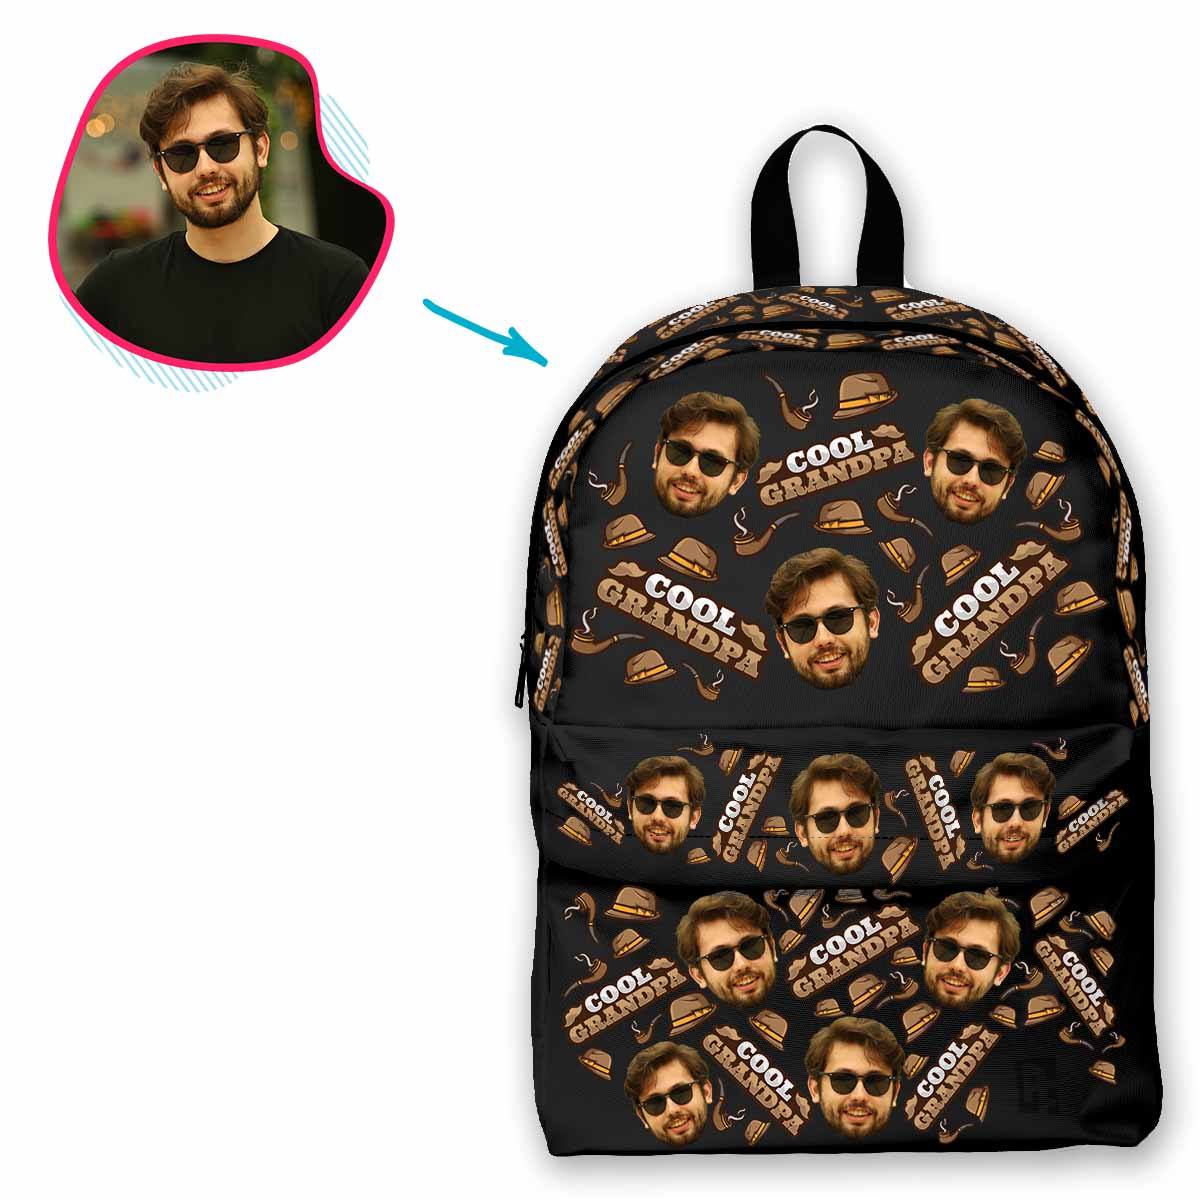 dark Cool Grandfather classic backpack personalized with photo of face printed on it